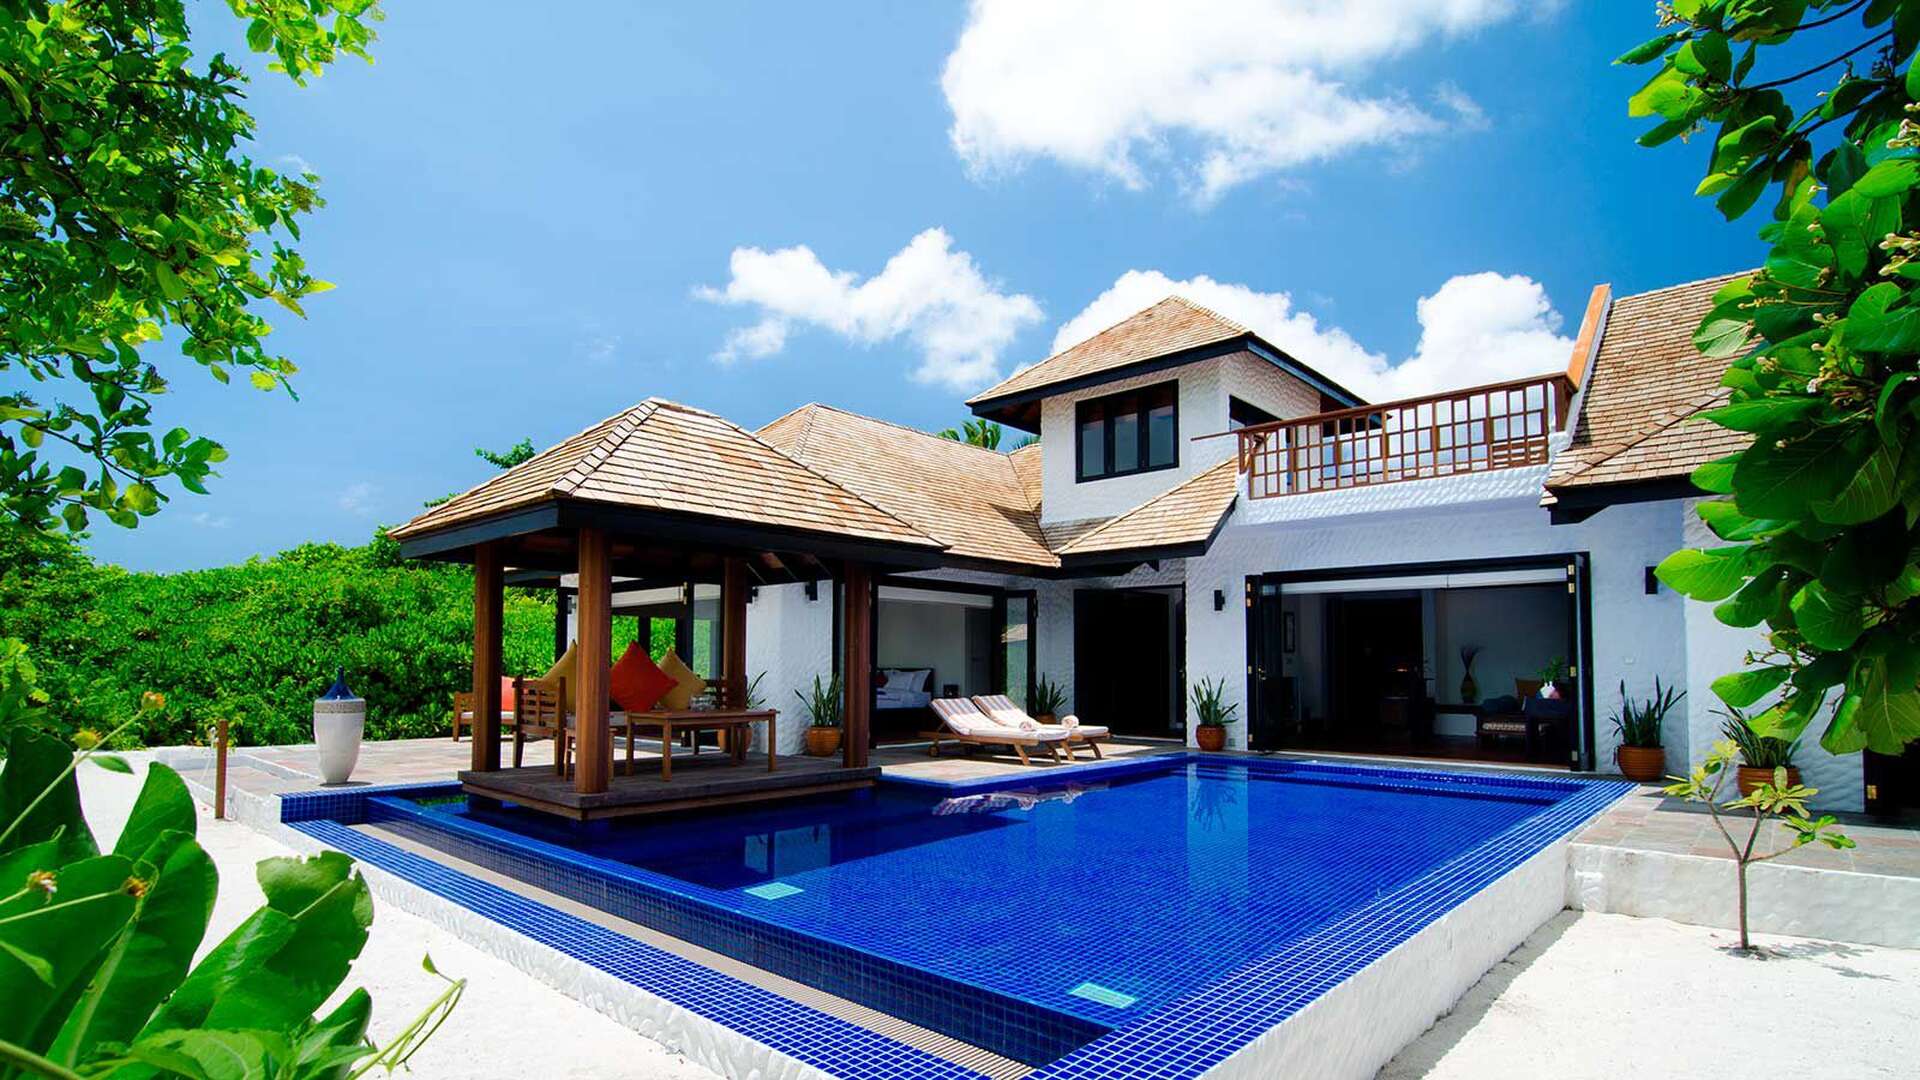  - Family Villa with Pool - Image 1/8